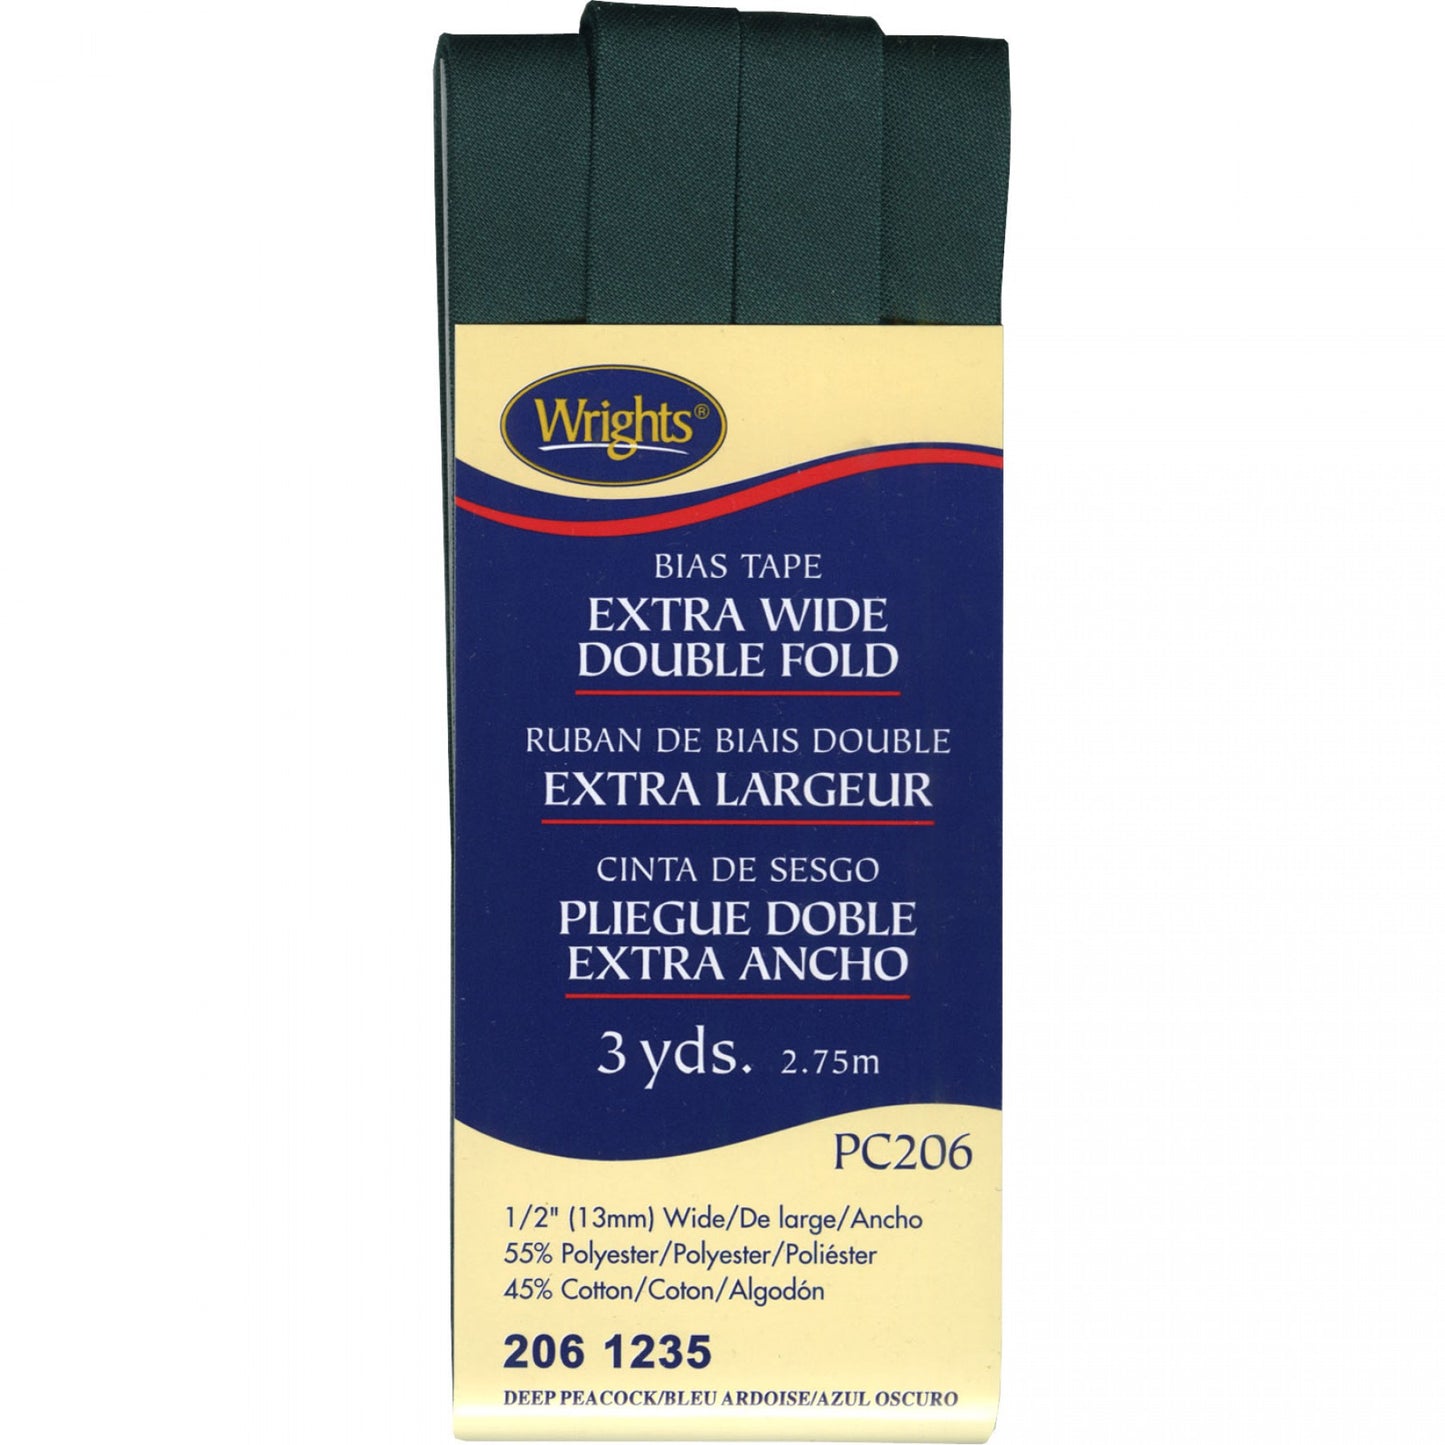 Wrights Bias Tape Extra Wide Double Fold 13mm x 2.75M Dark Green #1235